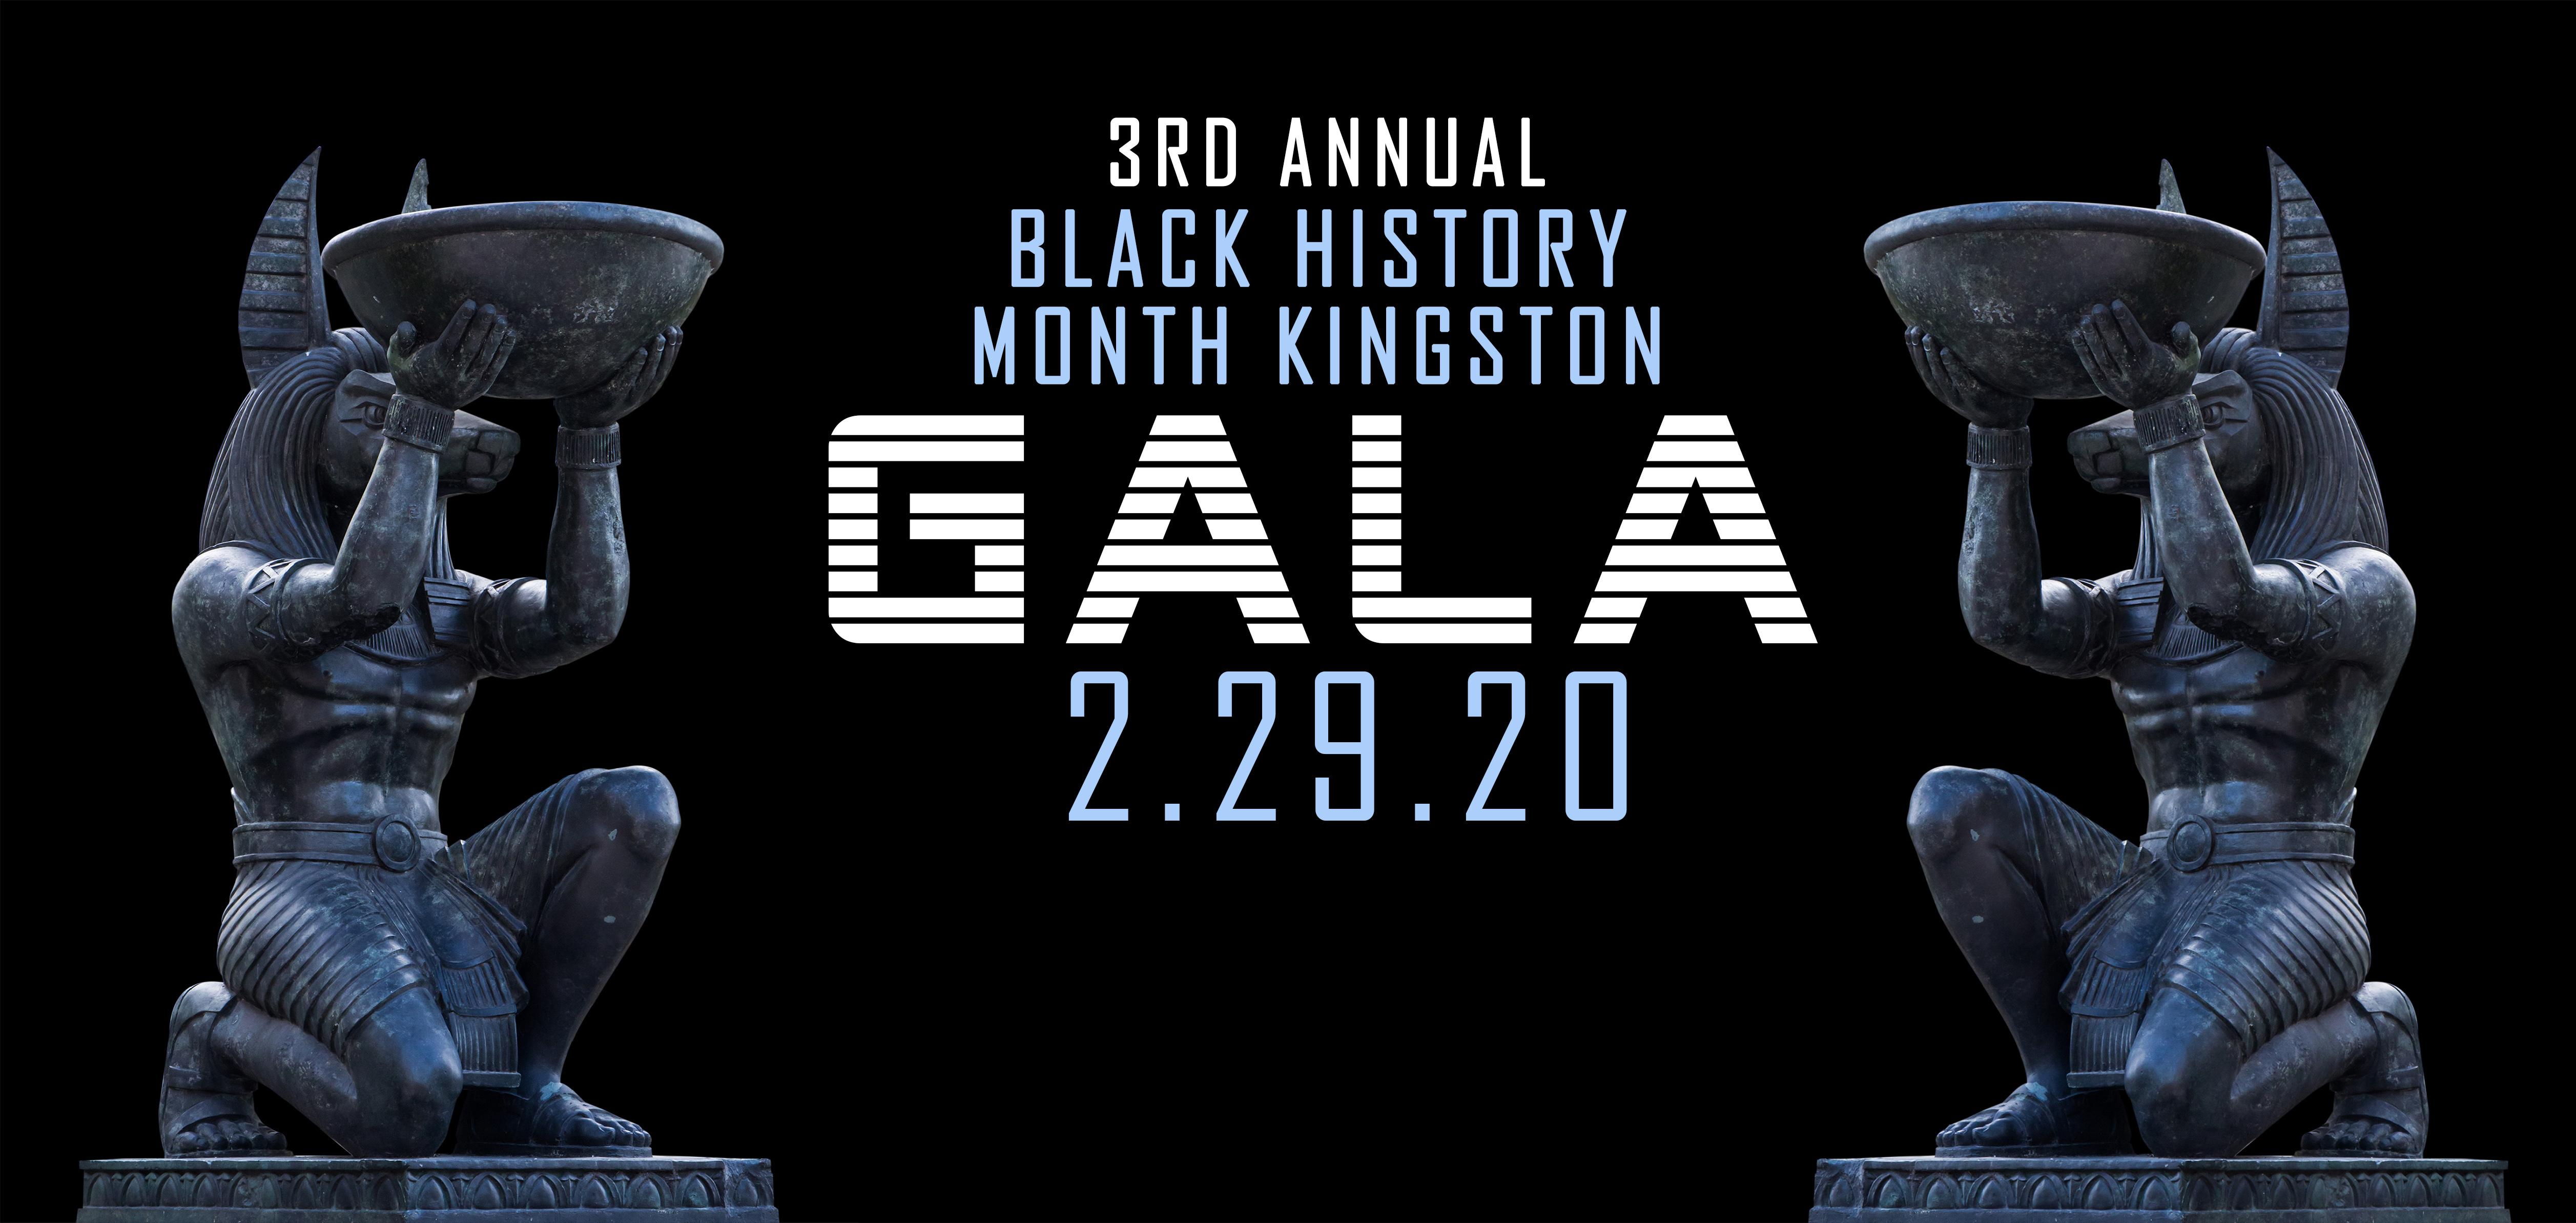 Harambee Presents The 3rd Annual Black History Month Kingston Gala